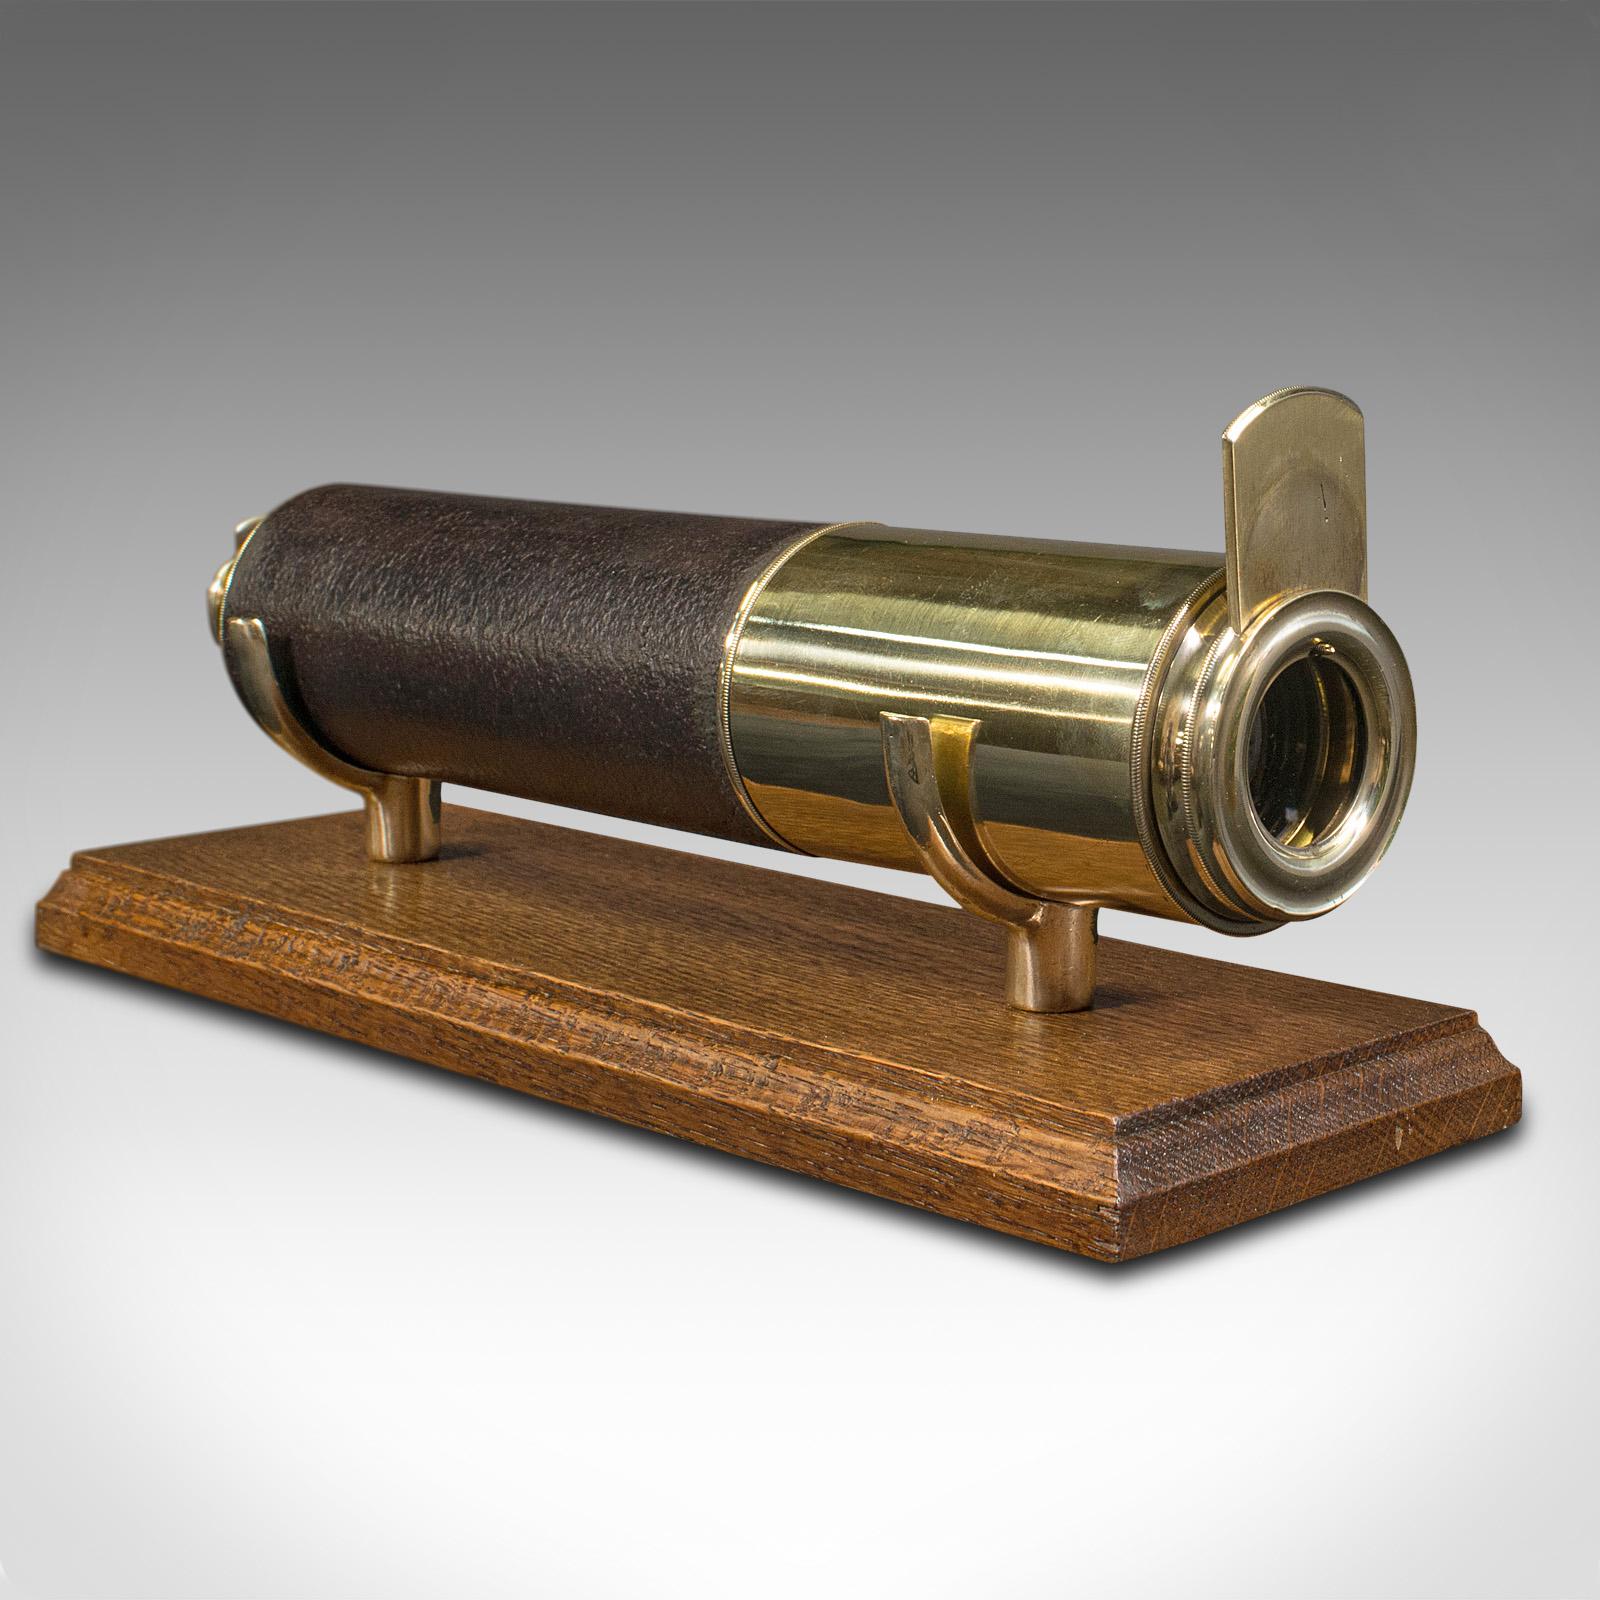 19th Century Antique 3 Draw Telescope, English, Brass, Leather, Terrestrial, Victorian, 1870 For Sale